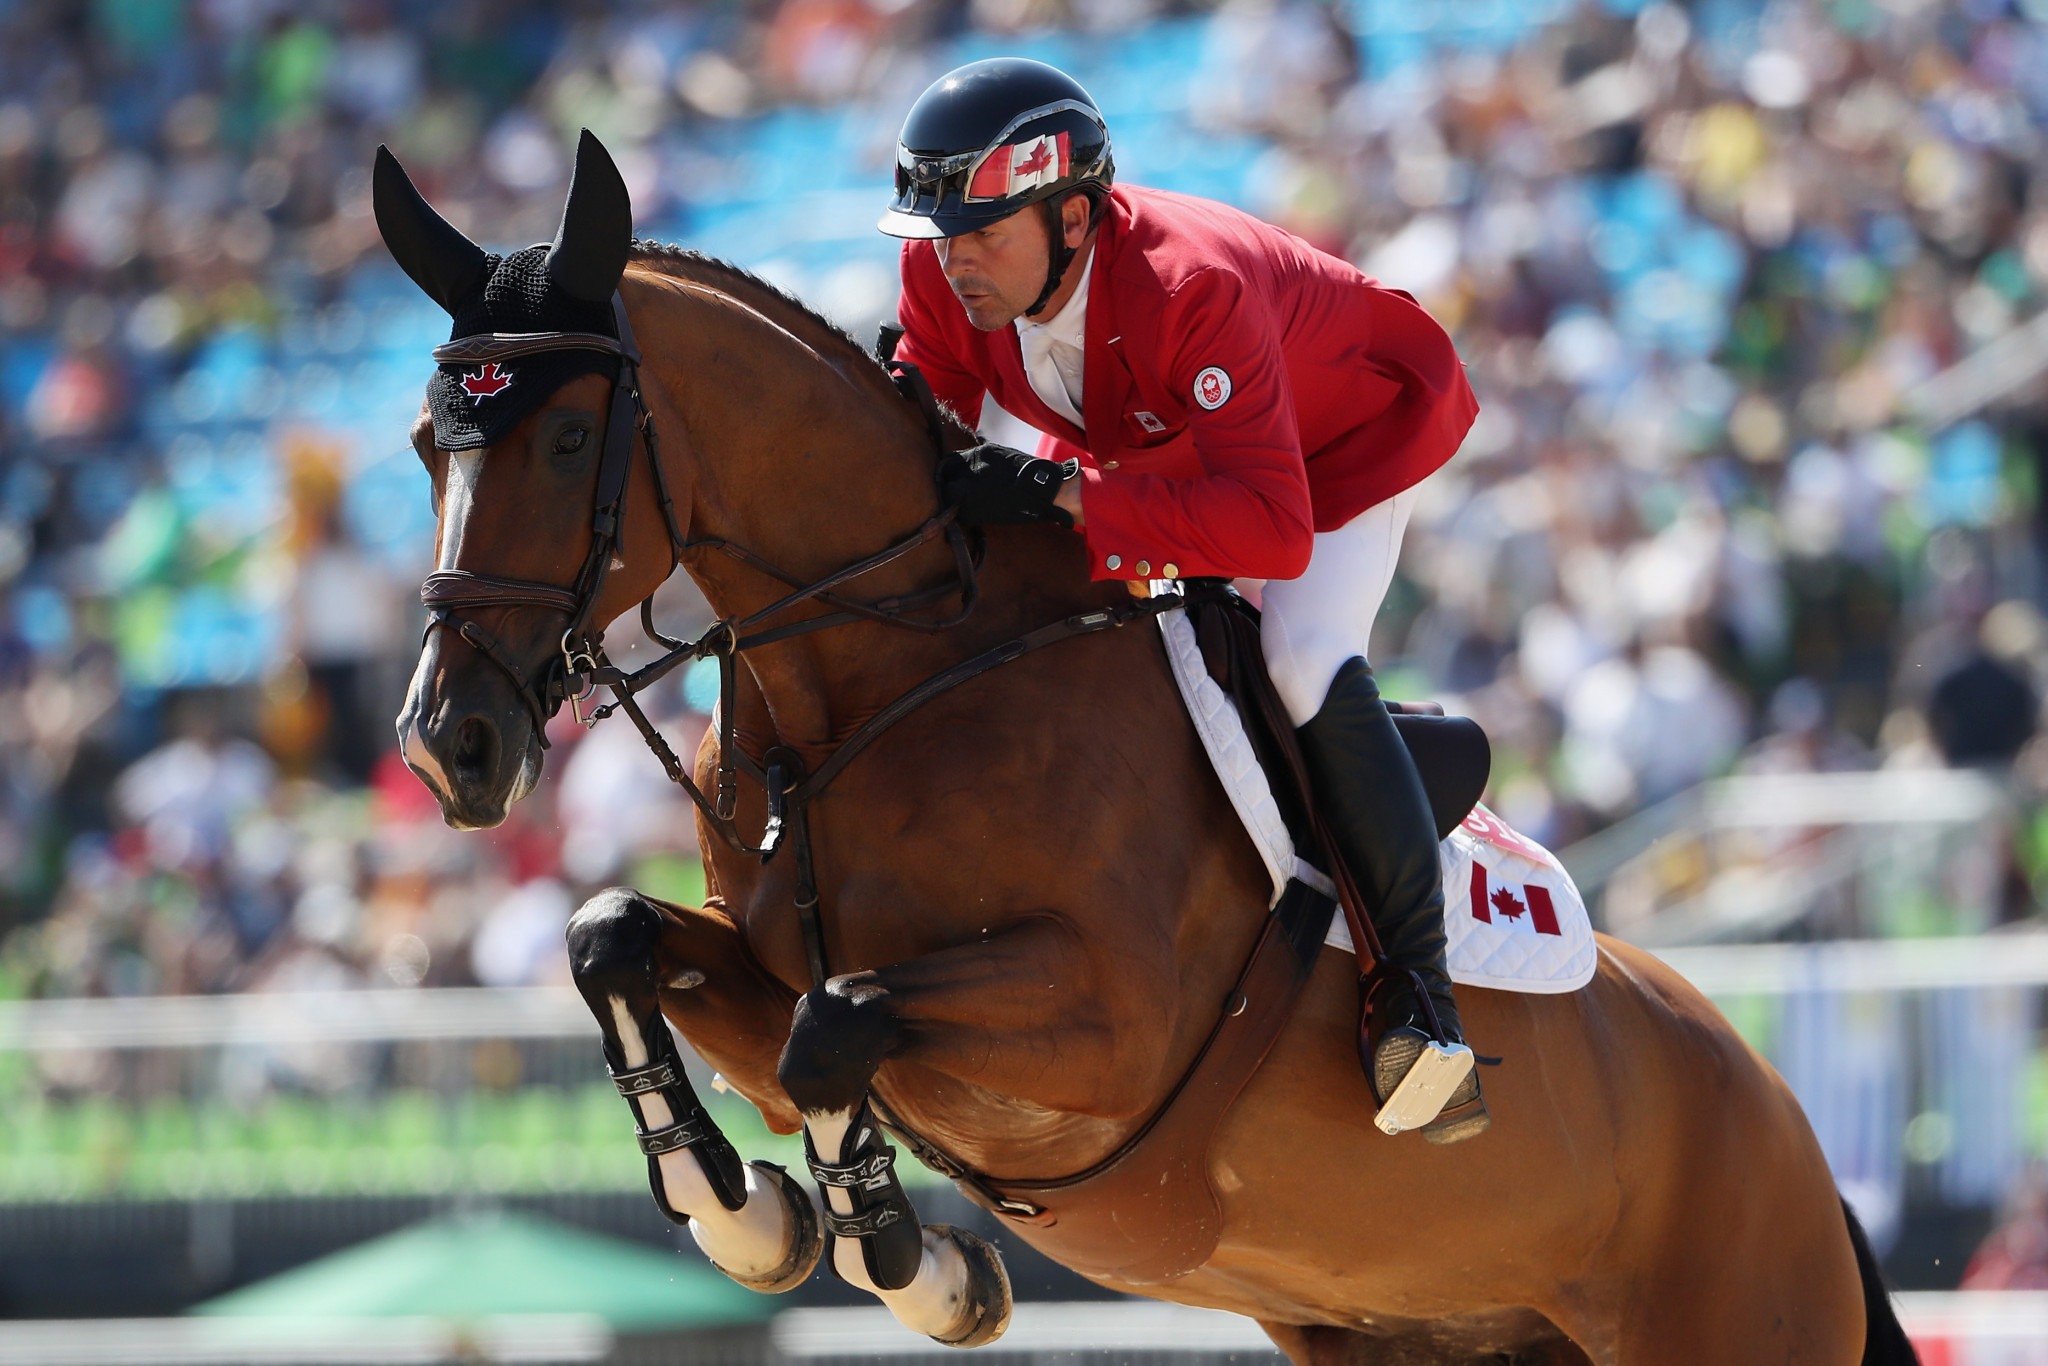 
Eric Lamaze of Canada rides his mare Fine Lady 5 during the Jumping Individual and Team Qualifier competition at the Olympic Equestrian Centre in Rio ©Getty Images